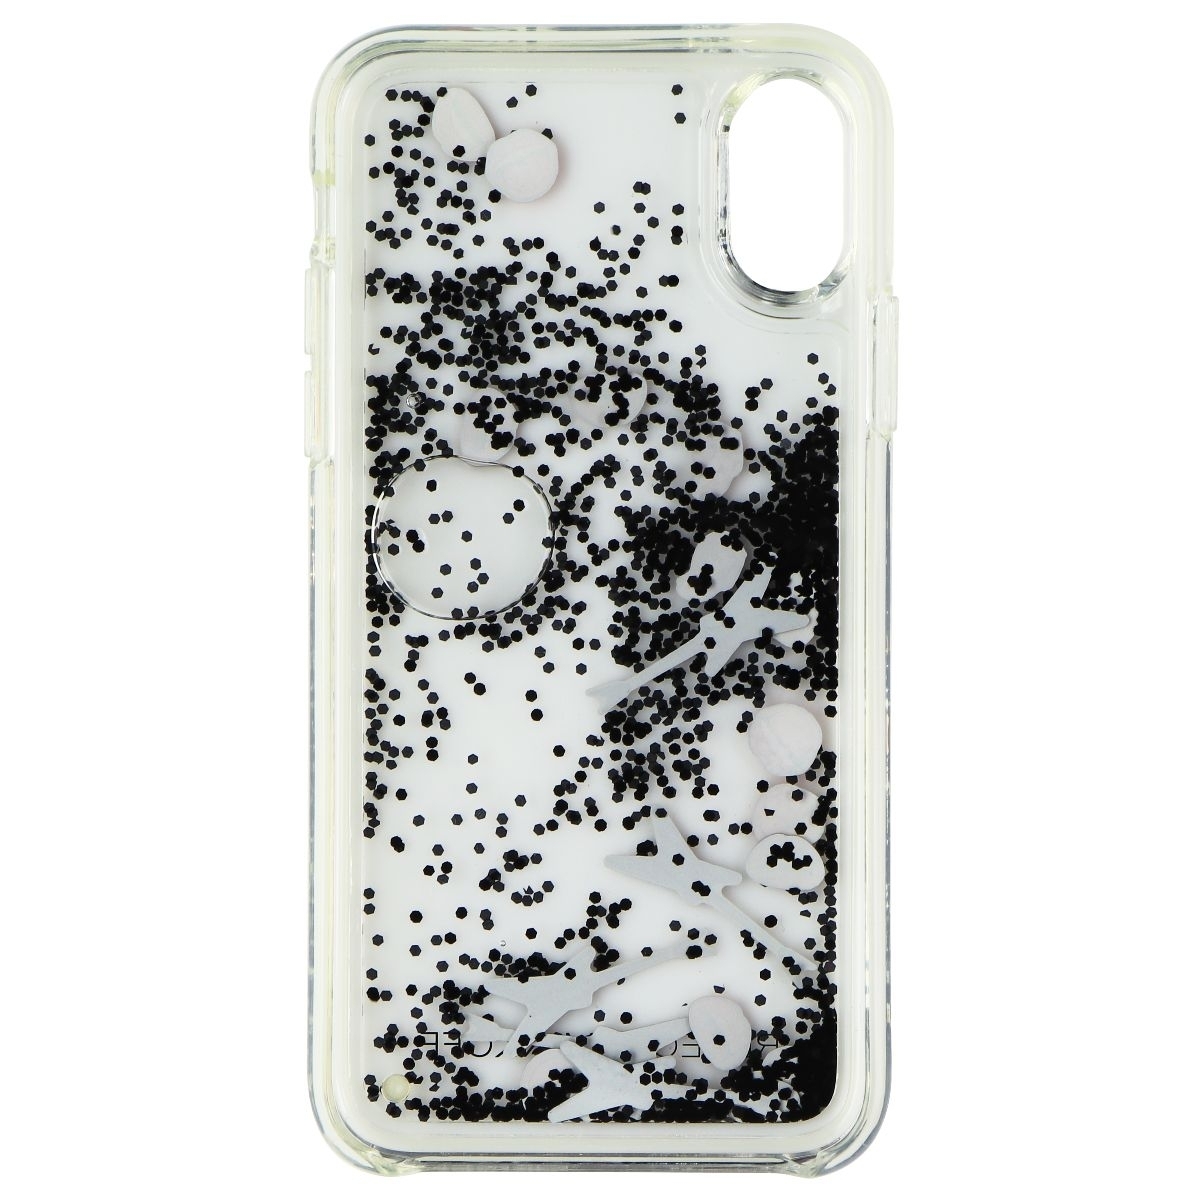 Rebecca Minkoff See Though Me Case For Apple IPhone Xs/X - Clear/Rockstar